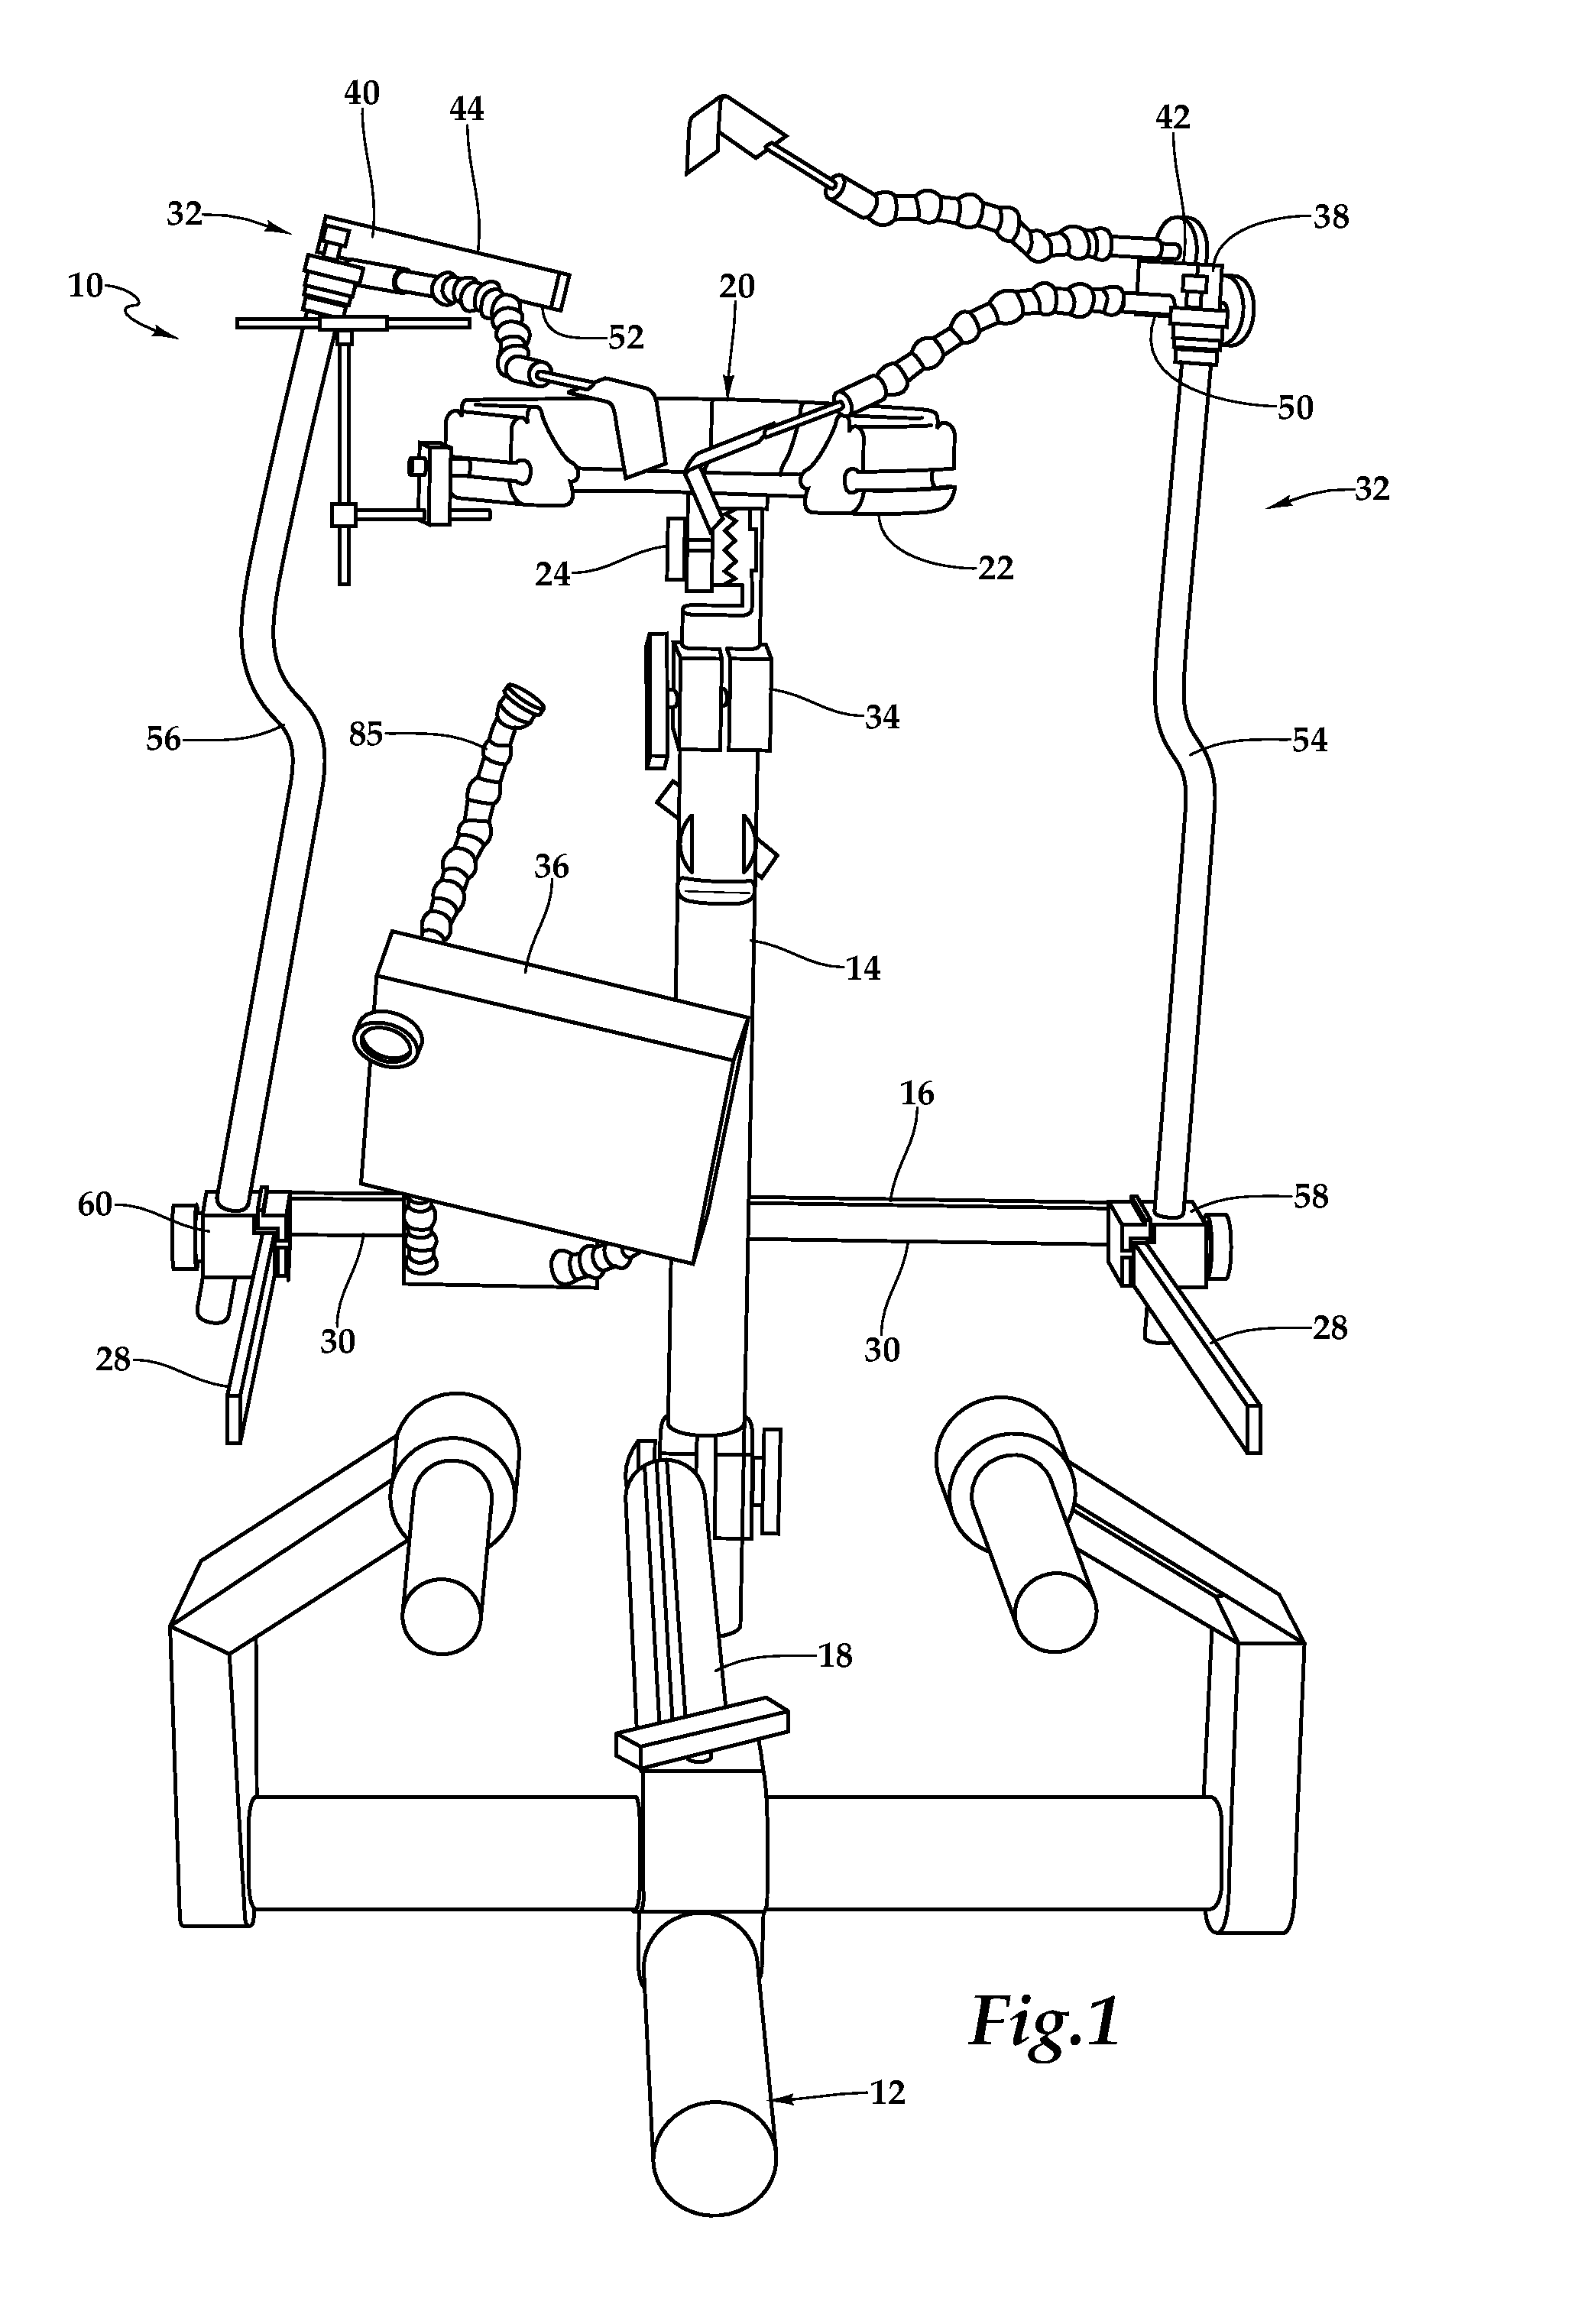 Surgical head holder and surgical accessories for use with same